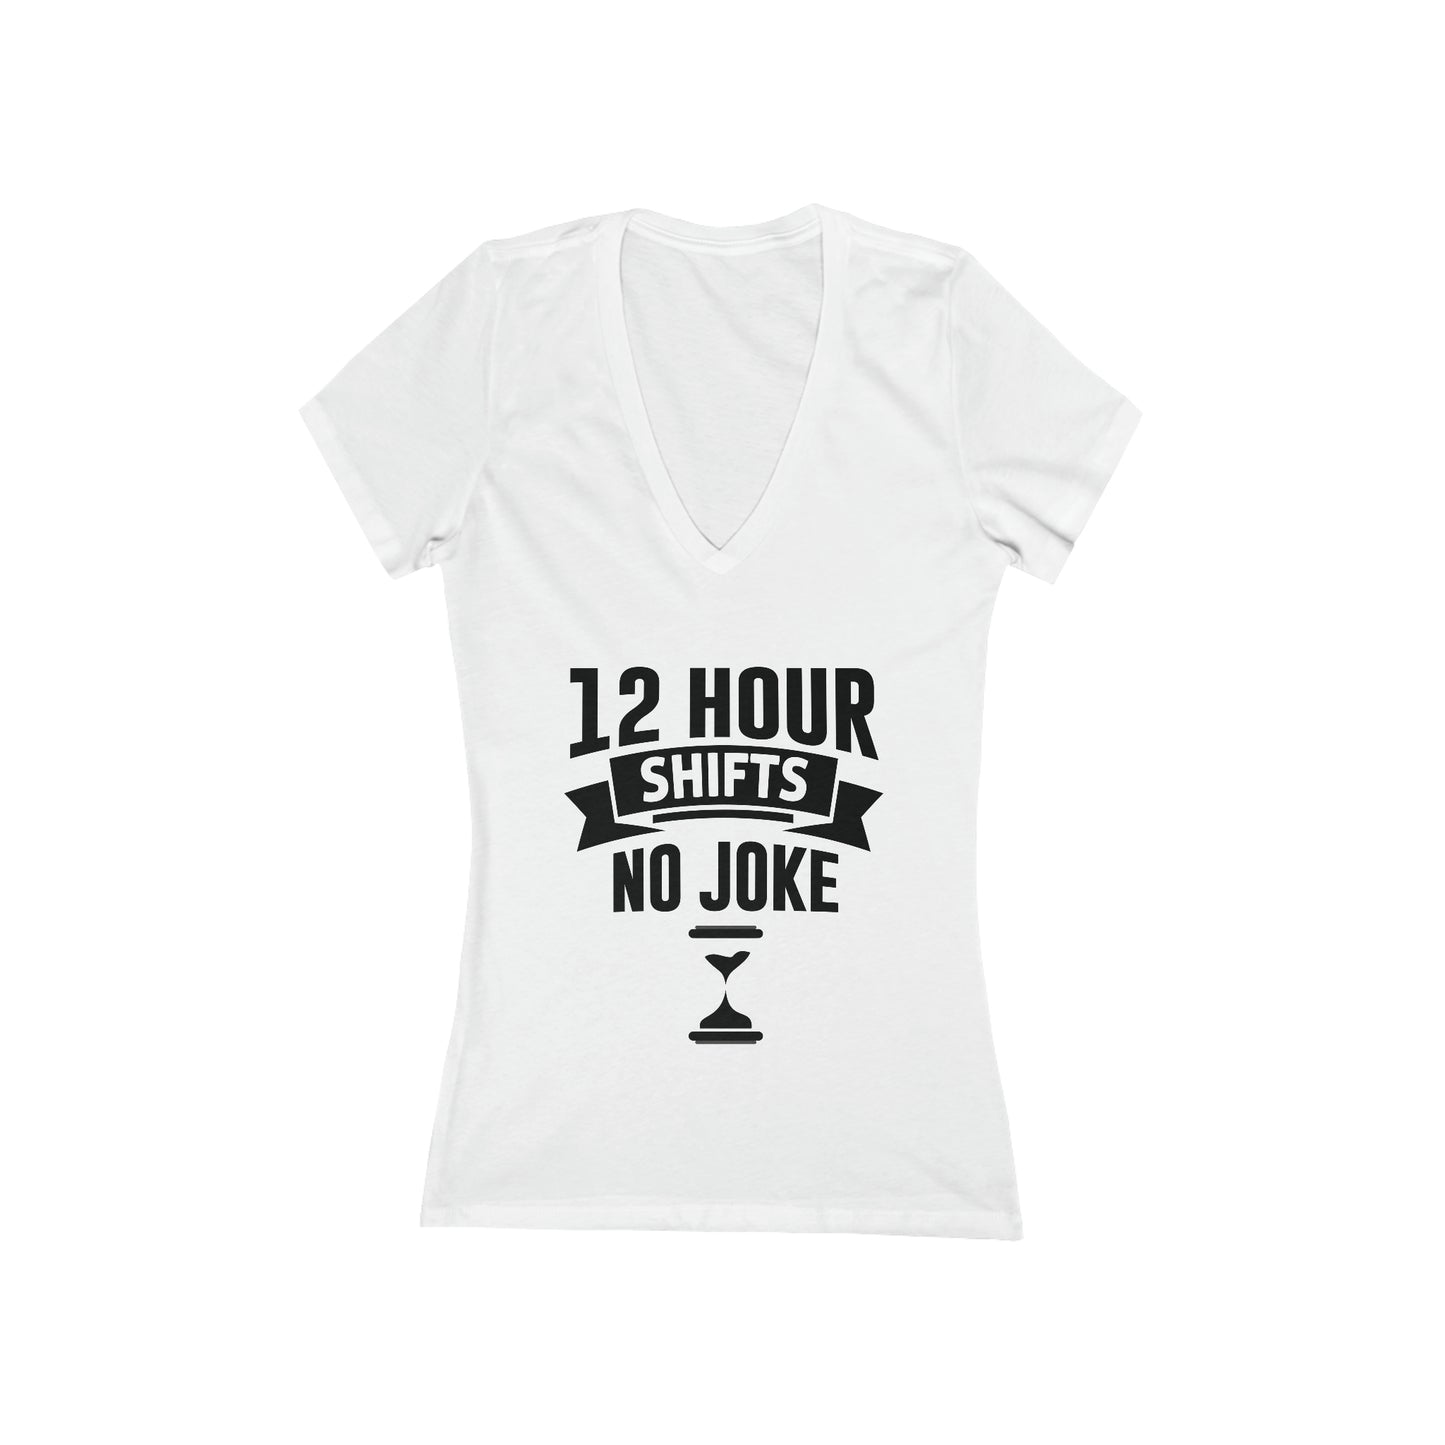 12 Hour Shifts No Joke Women's Jersey Short Sleeve Deep V-Neck Tee, Doctor shirts, Doctor gift ideas, New Doctor shirt, gift for doctors